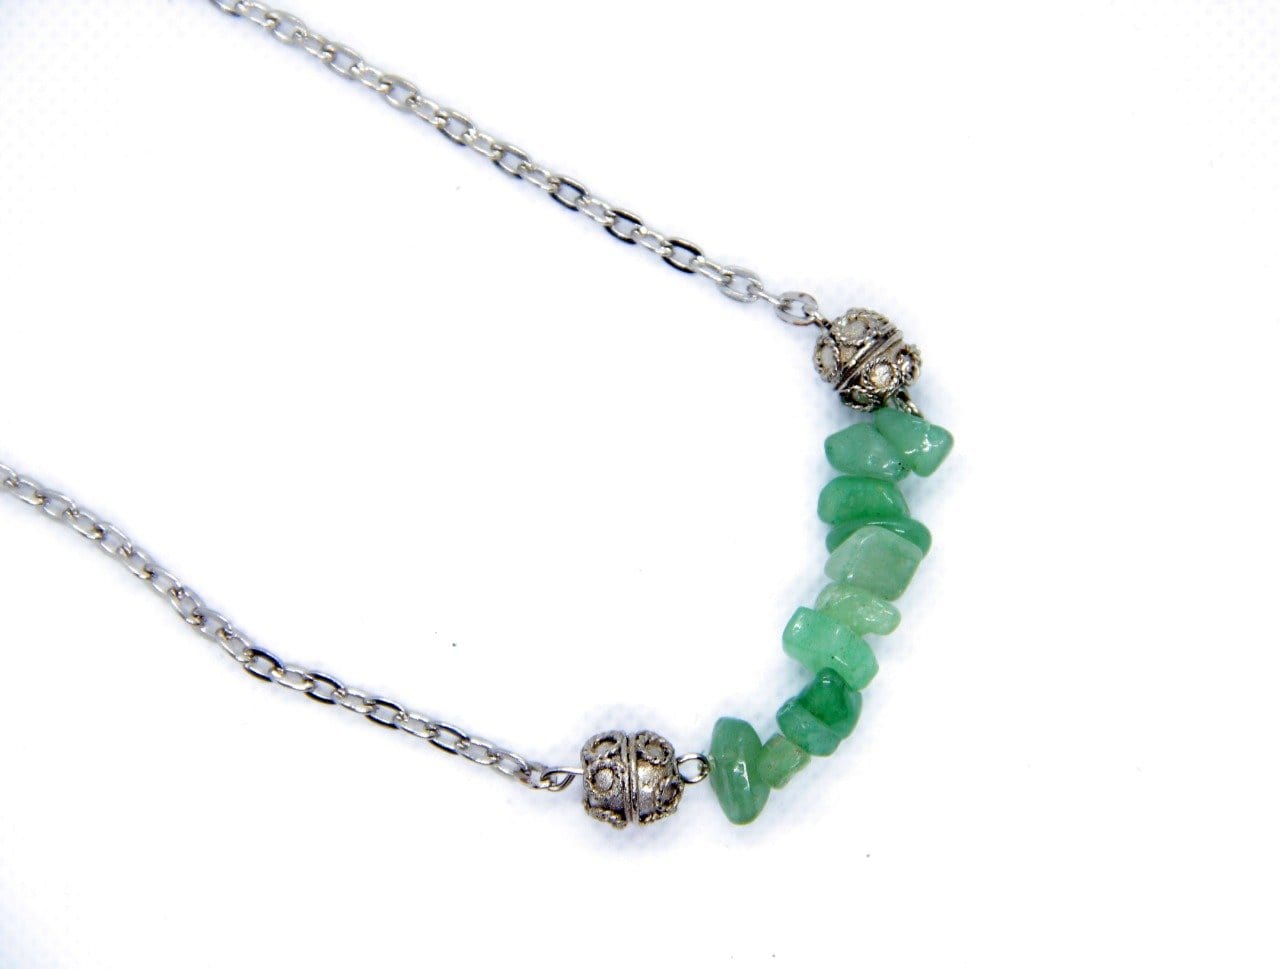 Spoofs Female Necklaces Simple Green Stones Necklace